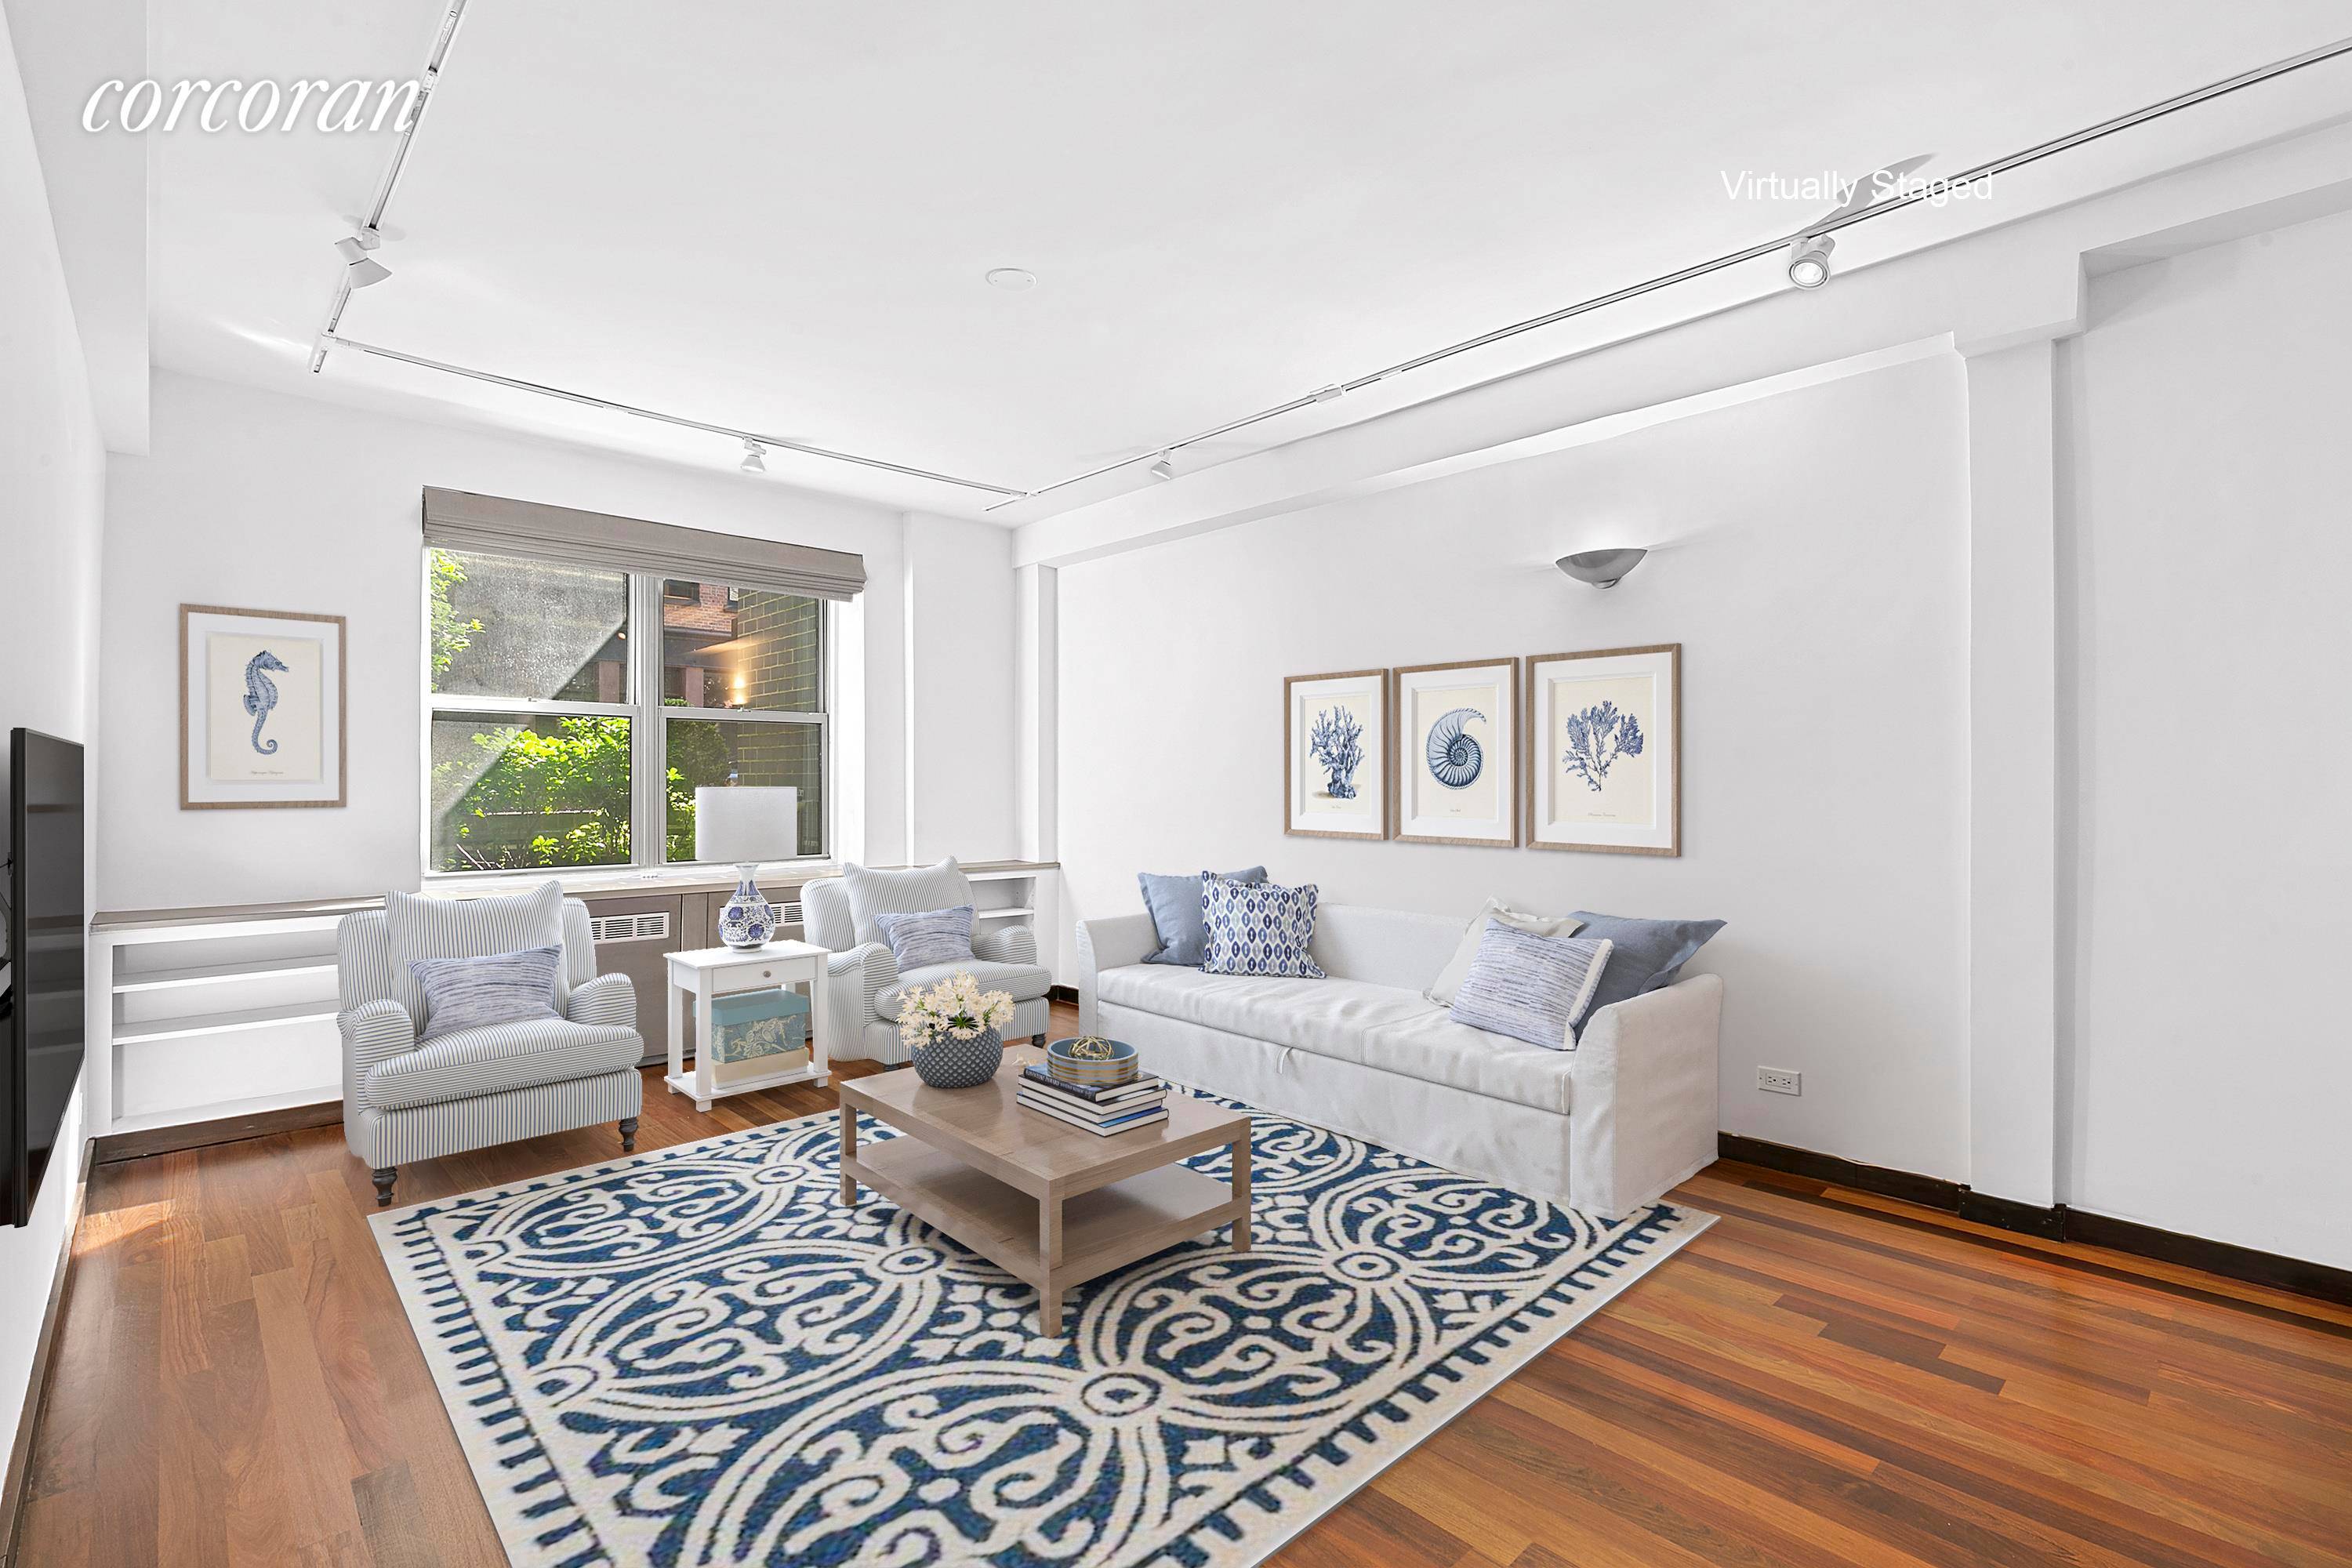 Visit this remarkable West Village 1 bed full service stunner at 350 Bleecker Street in the center of the world's most coveted neighborhood.